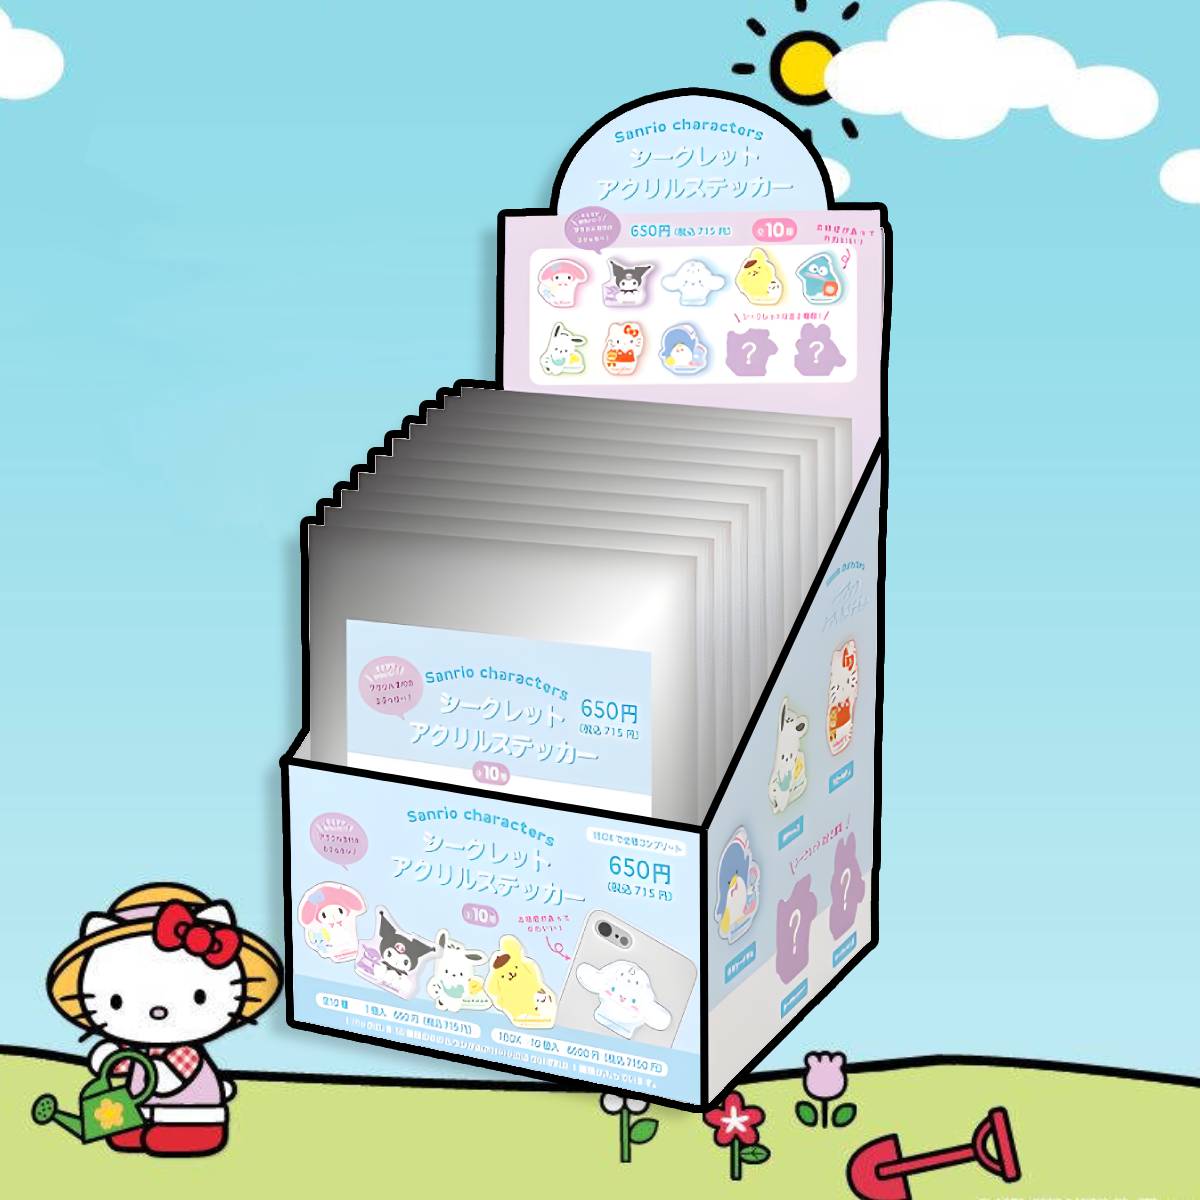 Mystery Box - Sanrio Characters Sticker 10 Styles (Japan Edition) (1 piece)